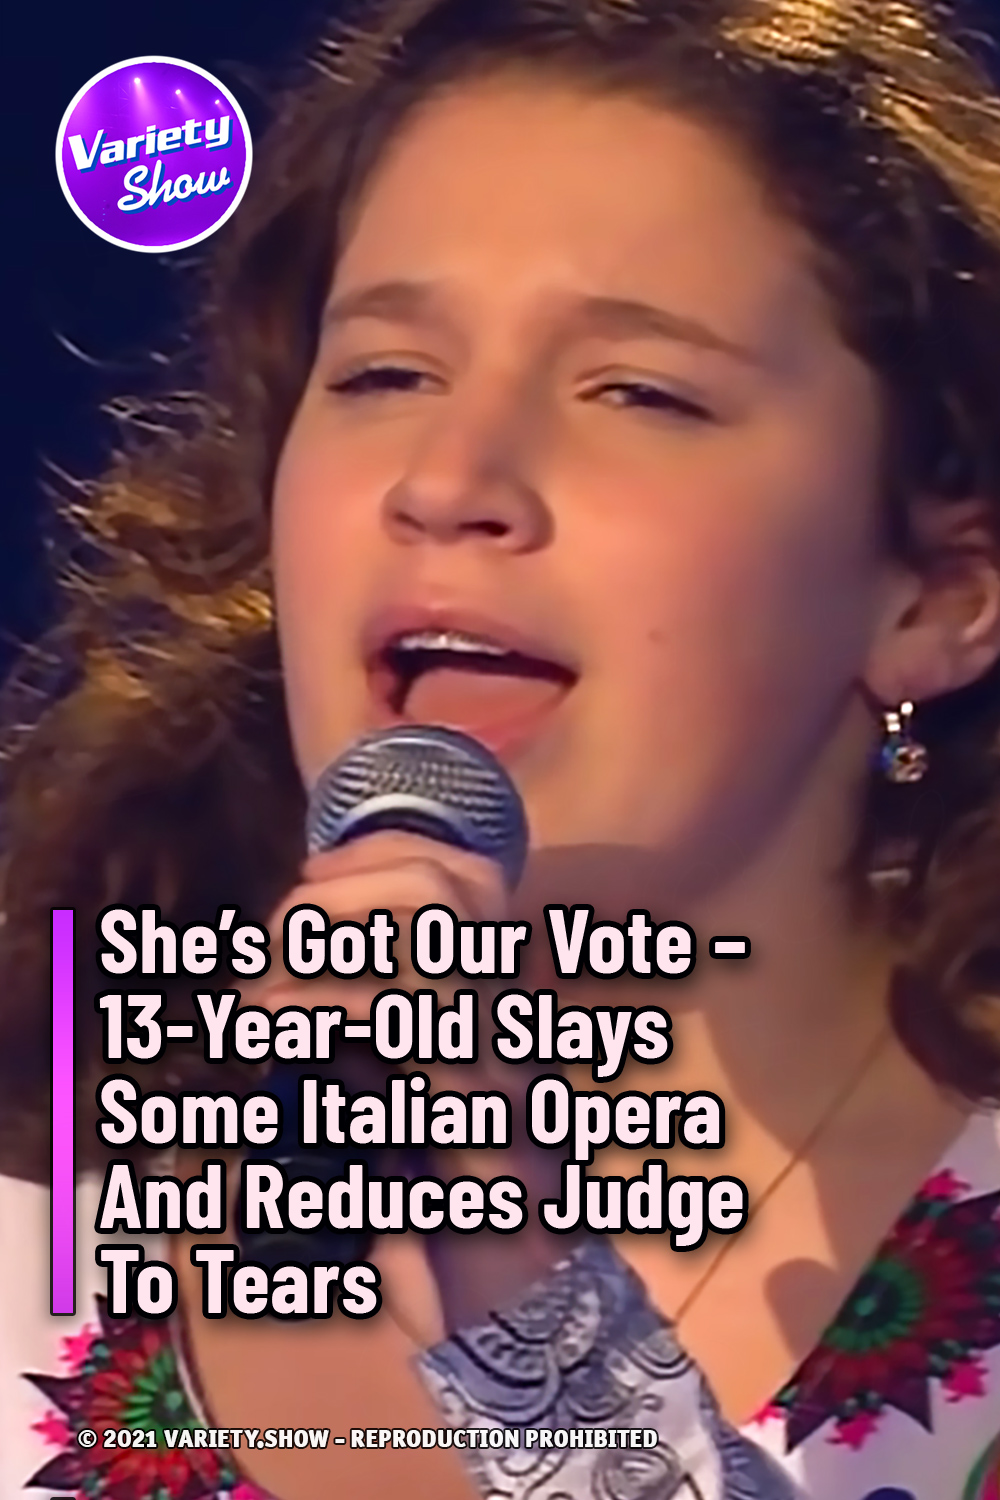 She’s Got Our Vote - 13-Year-Old Slays Some Italian Opera And Reduces Judge To Tears